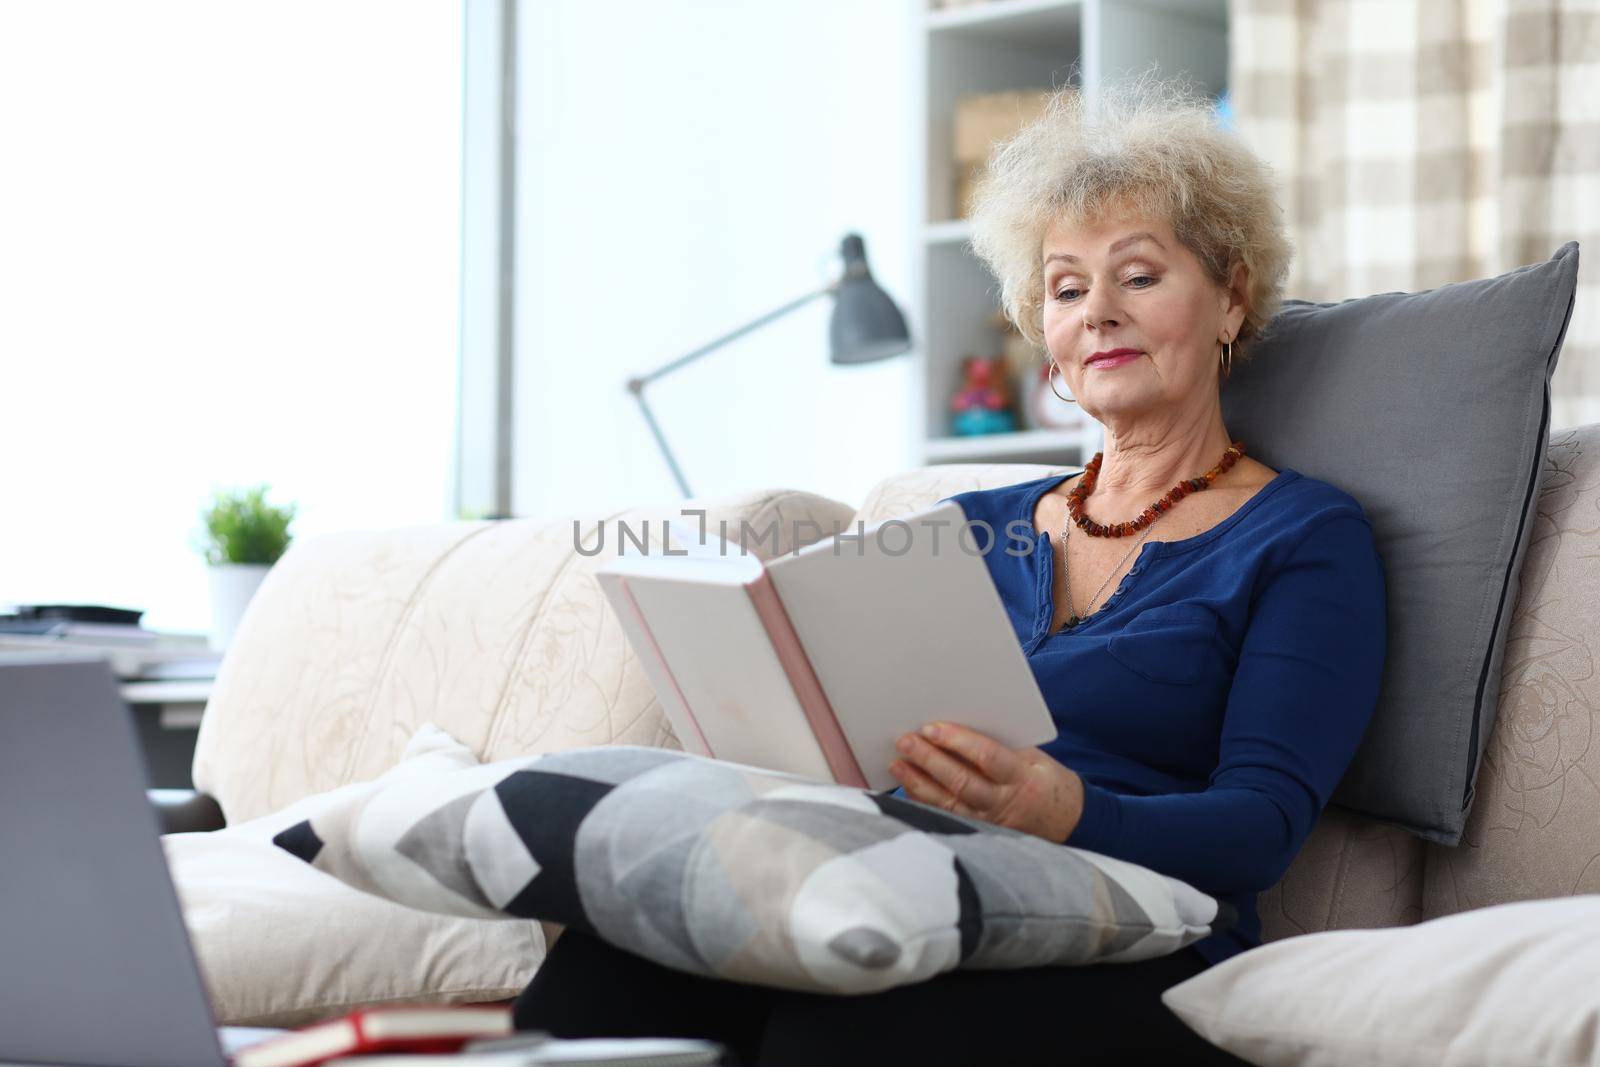 Elderly woman is reading book at home on couch. Home leisure pensioners concept